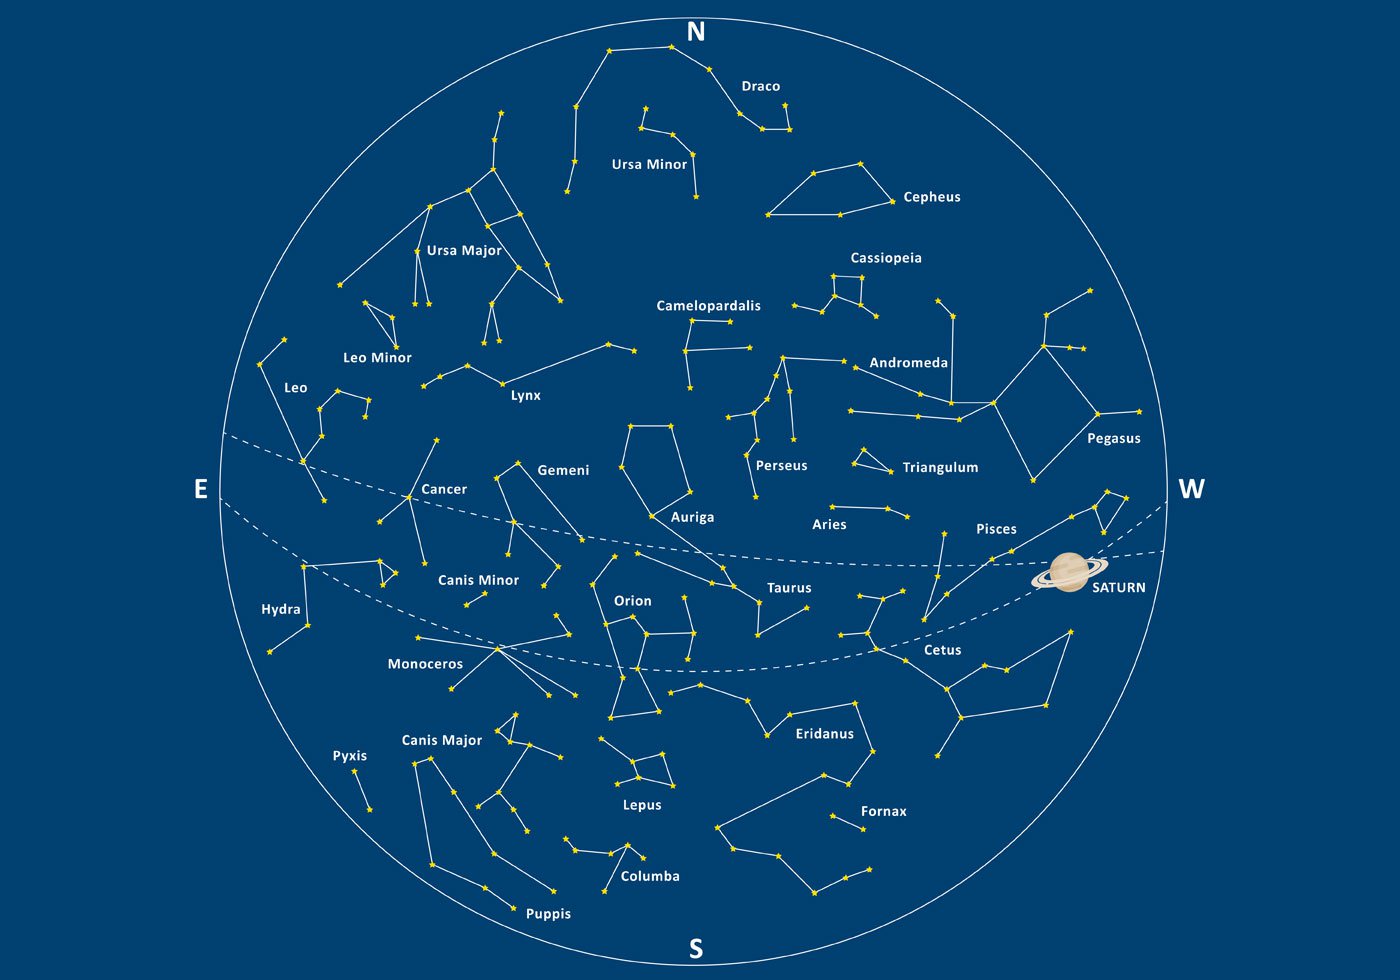 17 Constellation Map Vector Images Constellation Map, Andromeda Star